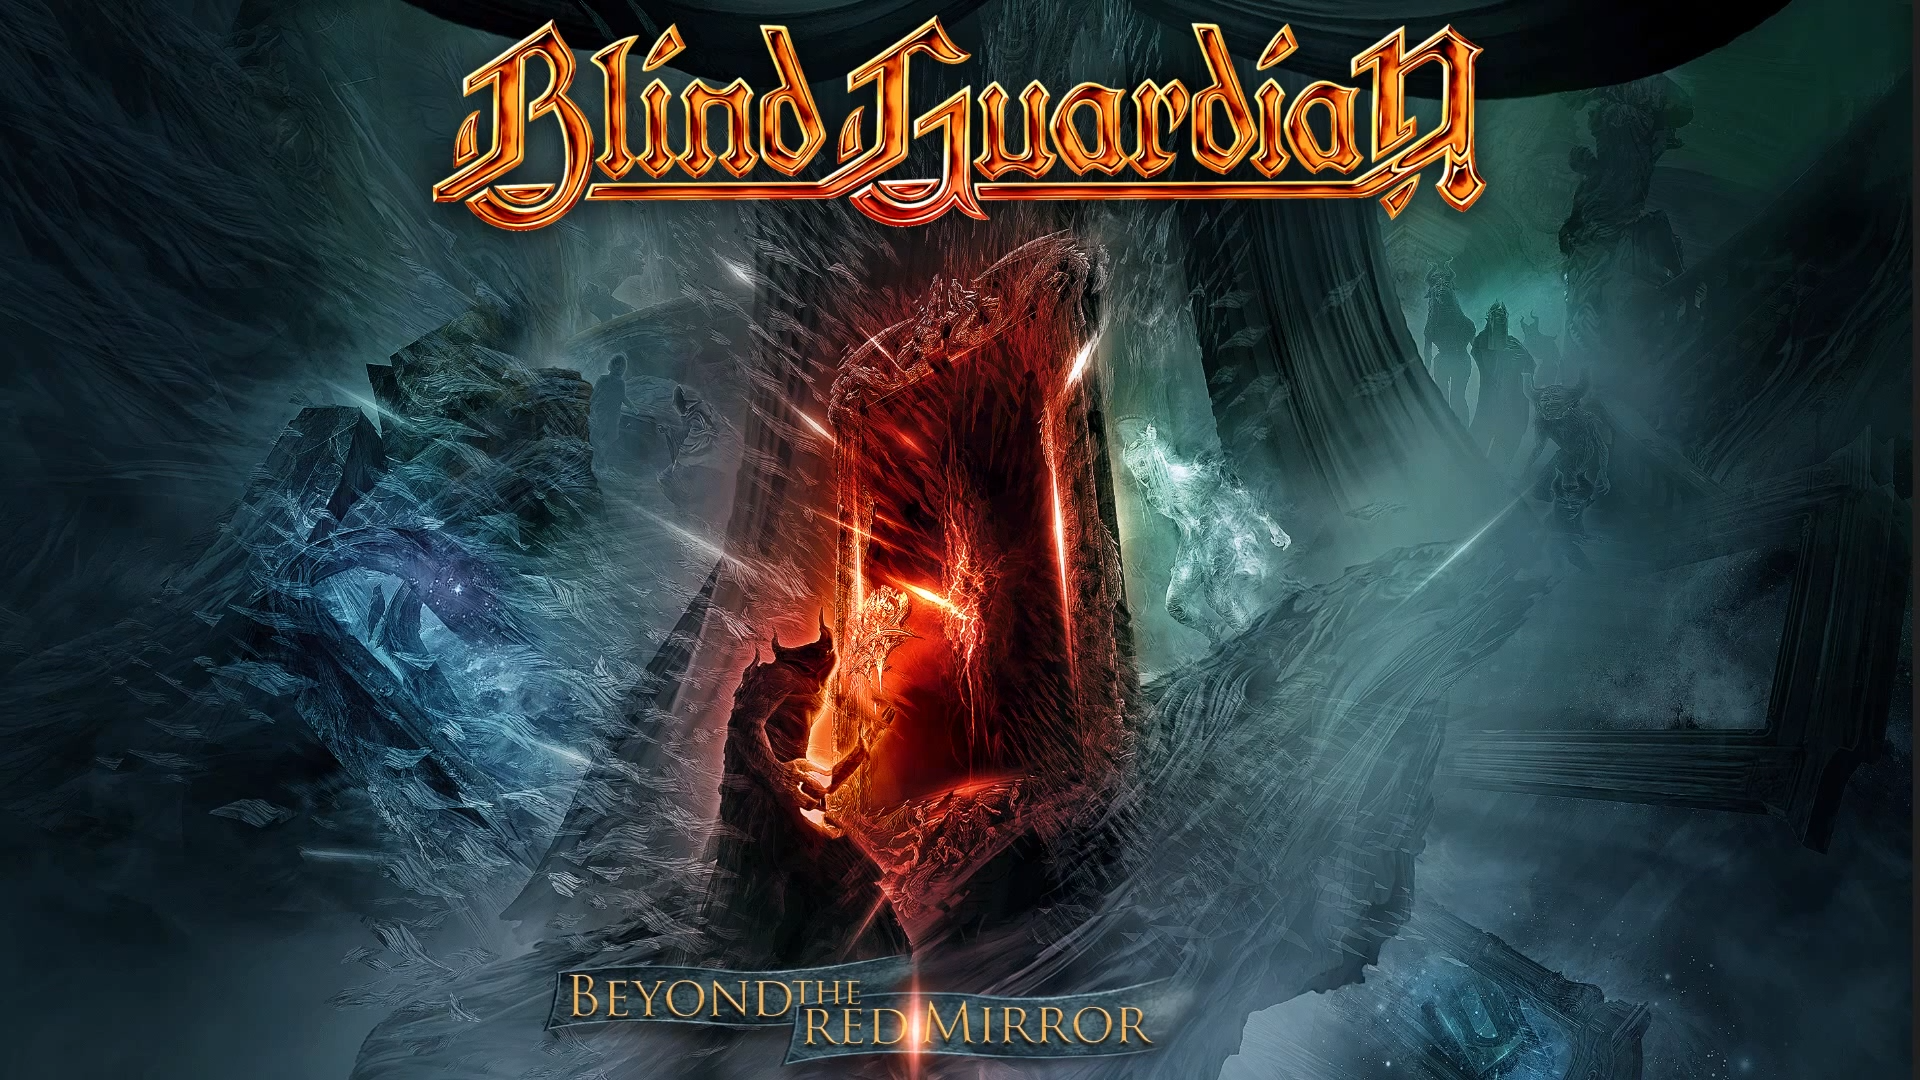 German metal band Blind Guardian wallpapers and images